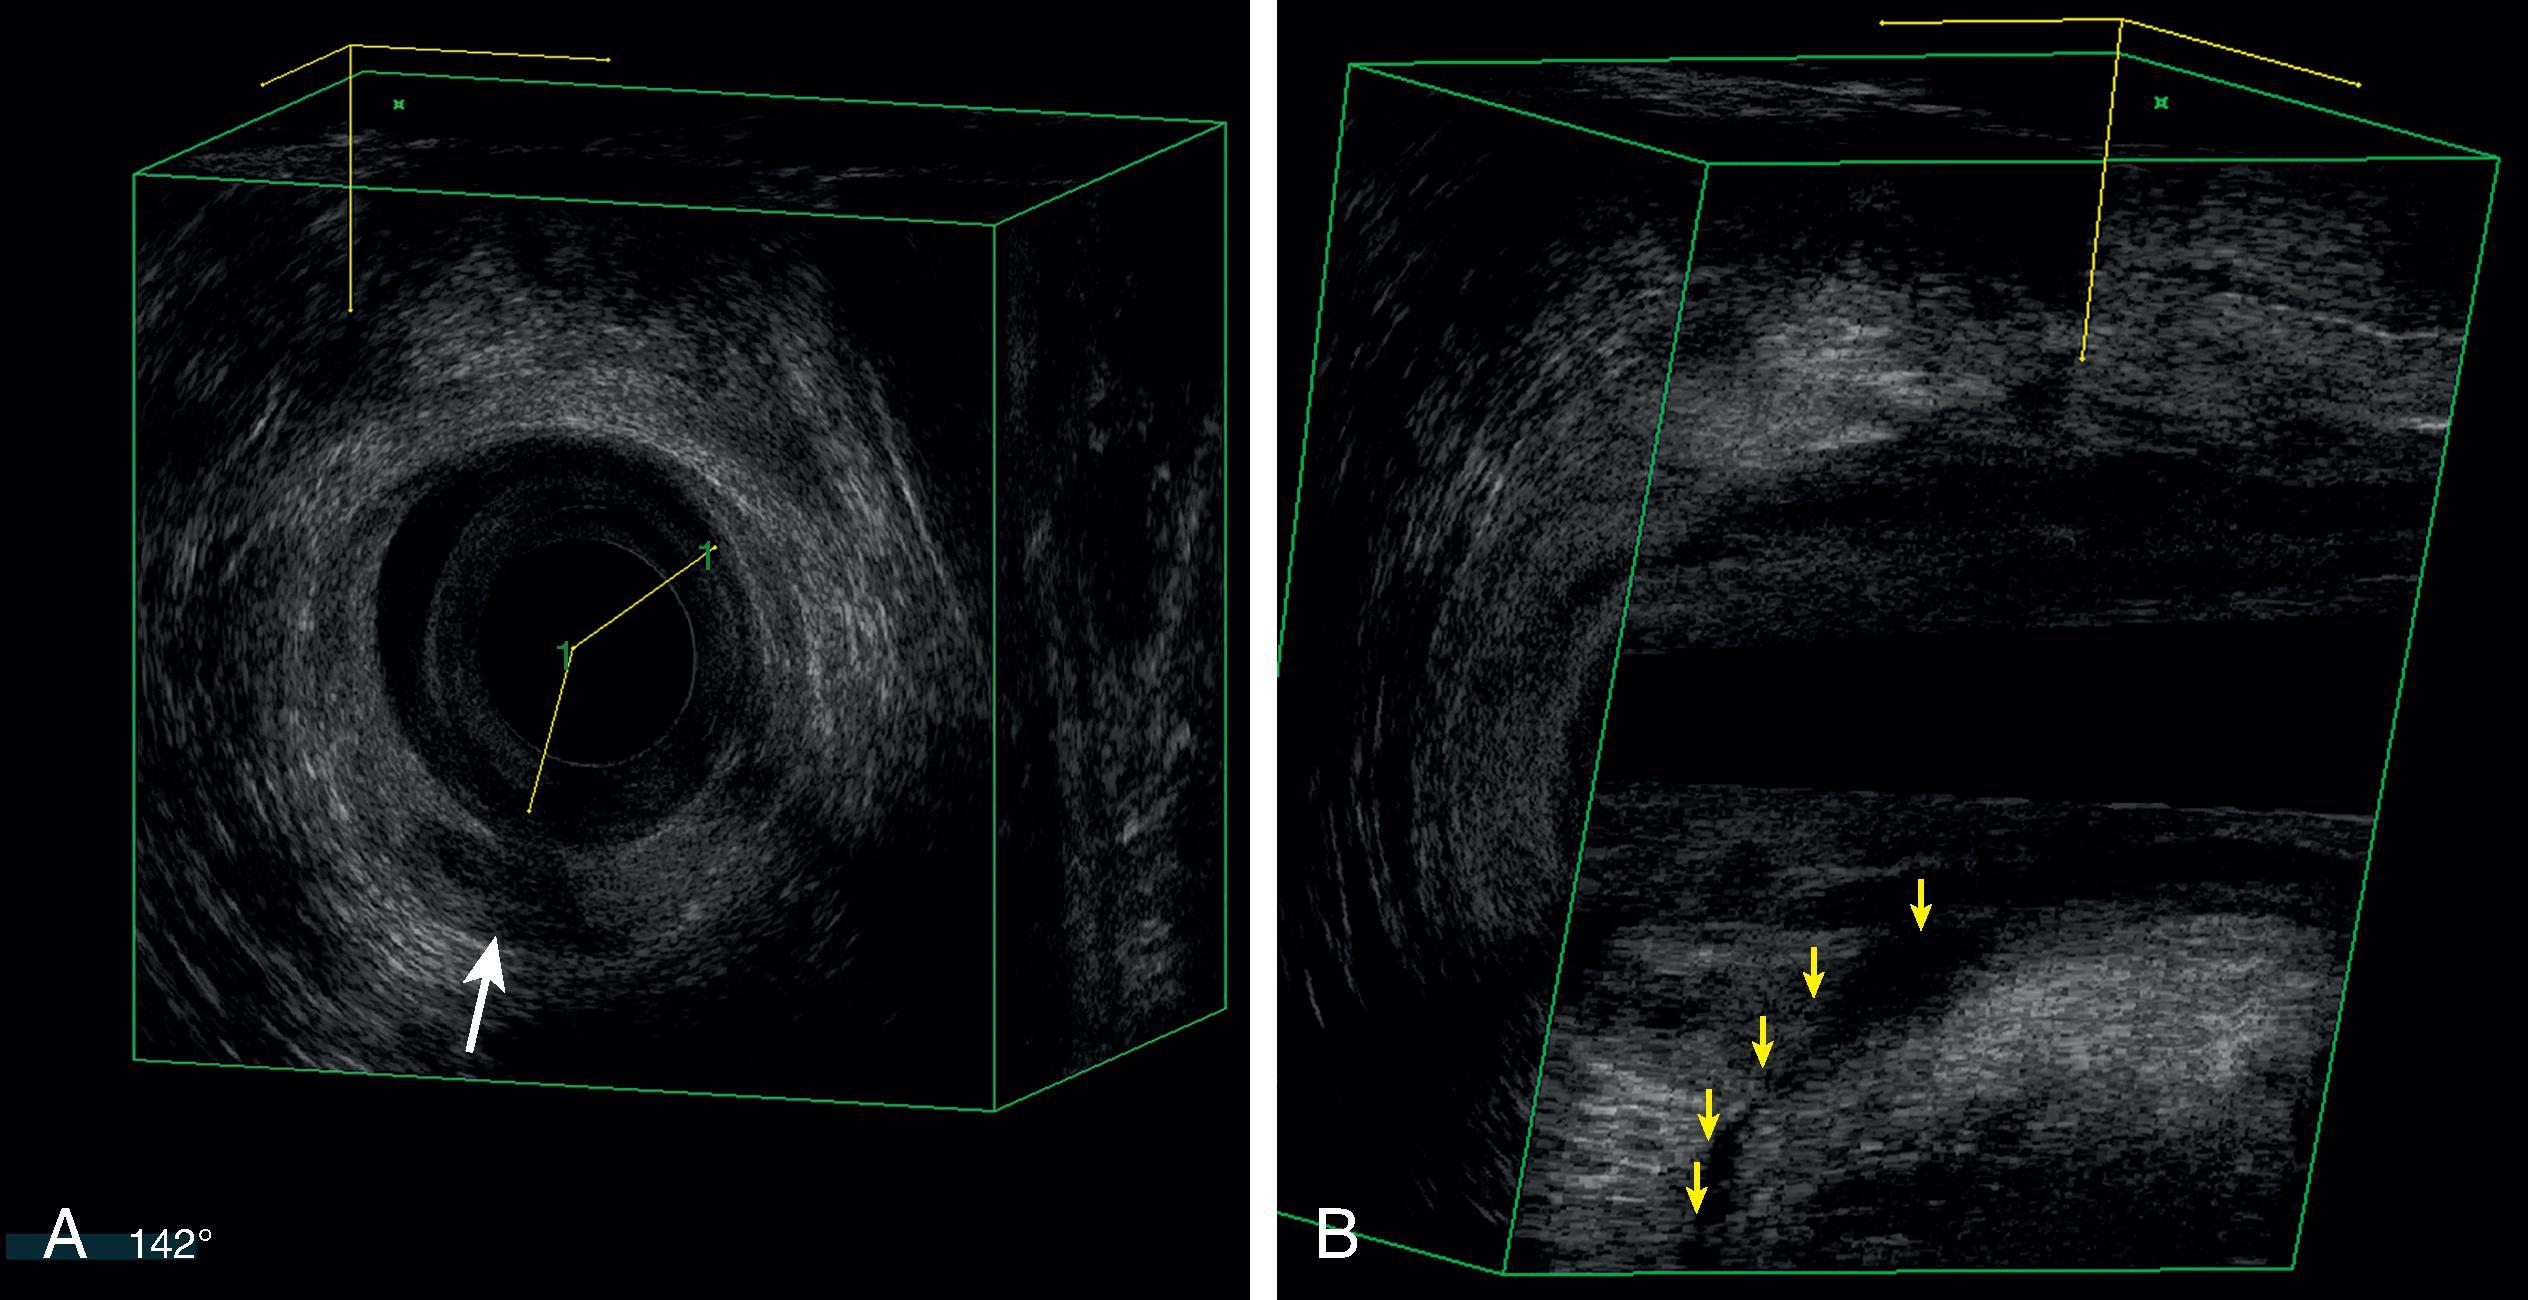 FIG. 5, Ultrasound scan of right posterior transsphincteric fistula. (A) Coronal view revealing a 142-degree internal sphincter defect on the left side from a previous hemorrhoidectomy. The hypoechoic internal opening of a right transsphincteric fistula is noted by the arrow . Given the edge of the internal sphincter defect abuts the fistula tract, ligation of the intersphincteric fistula tract procedure may not be feasible. (B) Angled sagittal view showing the hypoechoic transsphincteric fistula. Note the internal opening (arrows) nears half the length of the hyperechoic external sphincter; therefore, a fistulotomy would not be appropriate.